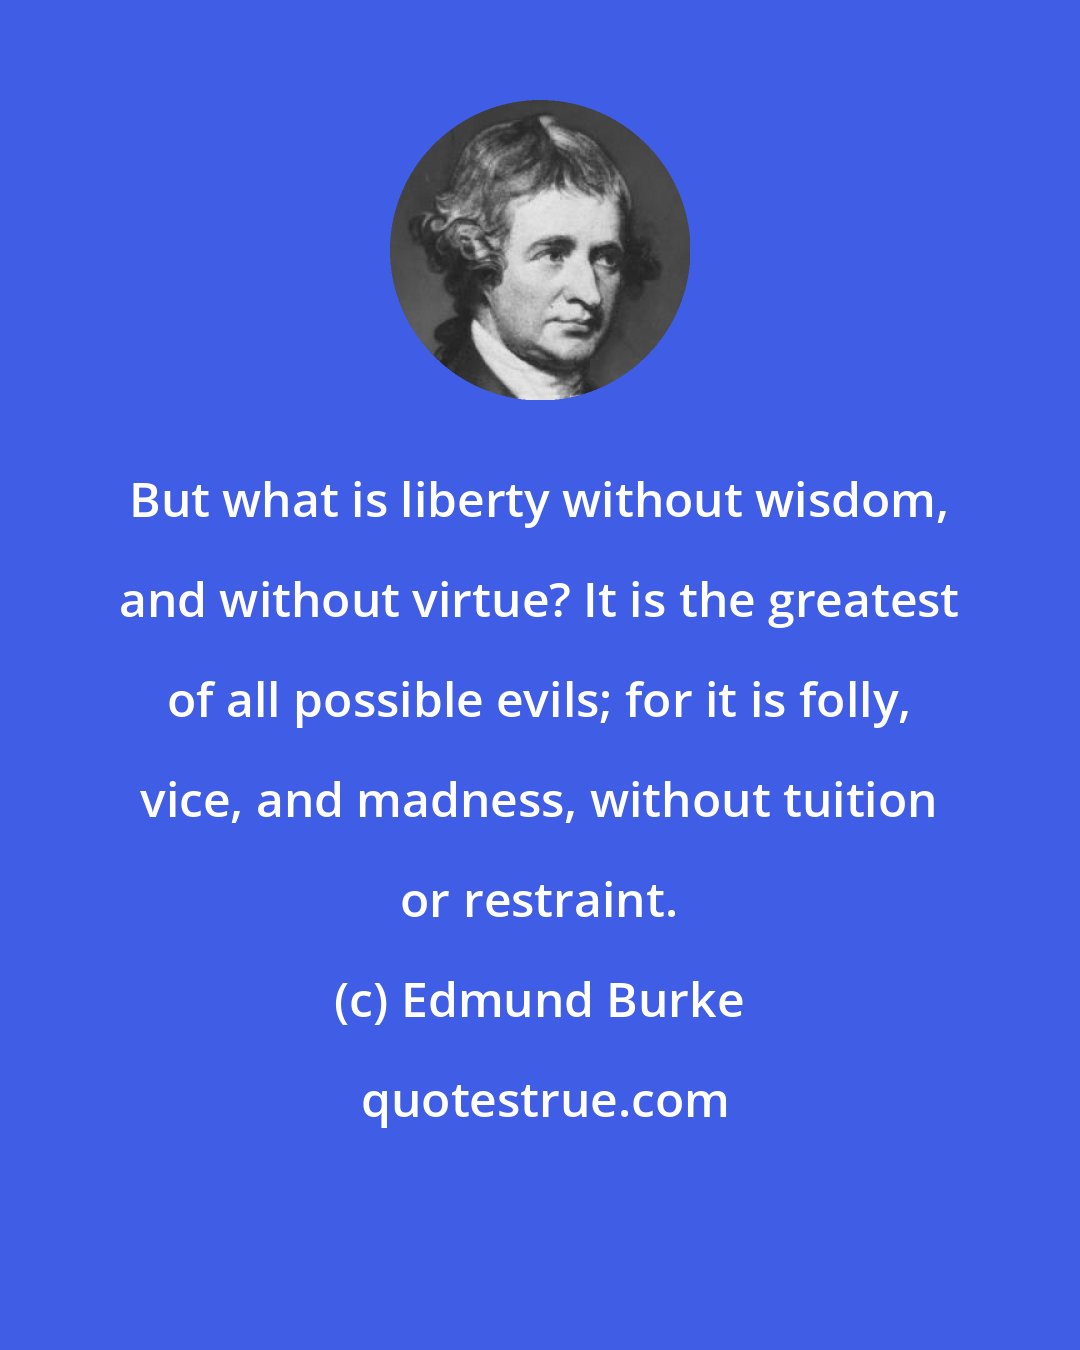 Edmund Burke: But what is liberty without wisdom, and without virtue? It is the greatest of all possible evils; for it is folly, vice, and madness, without tuition or restraint.